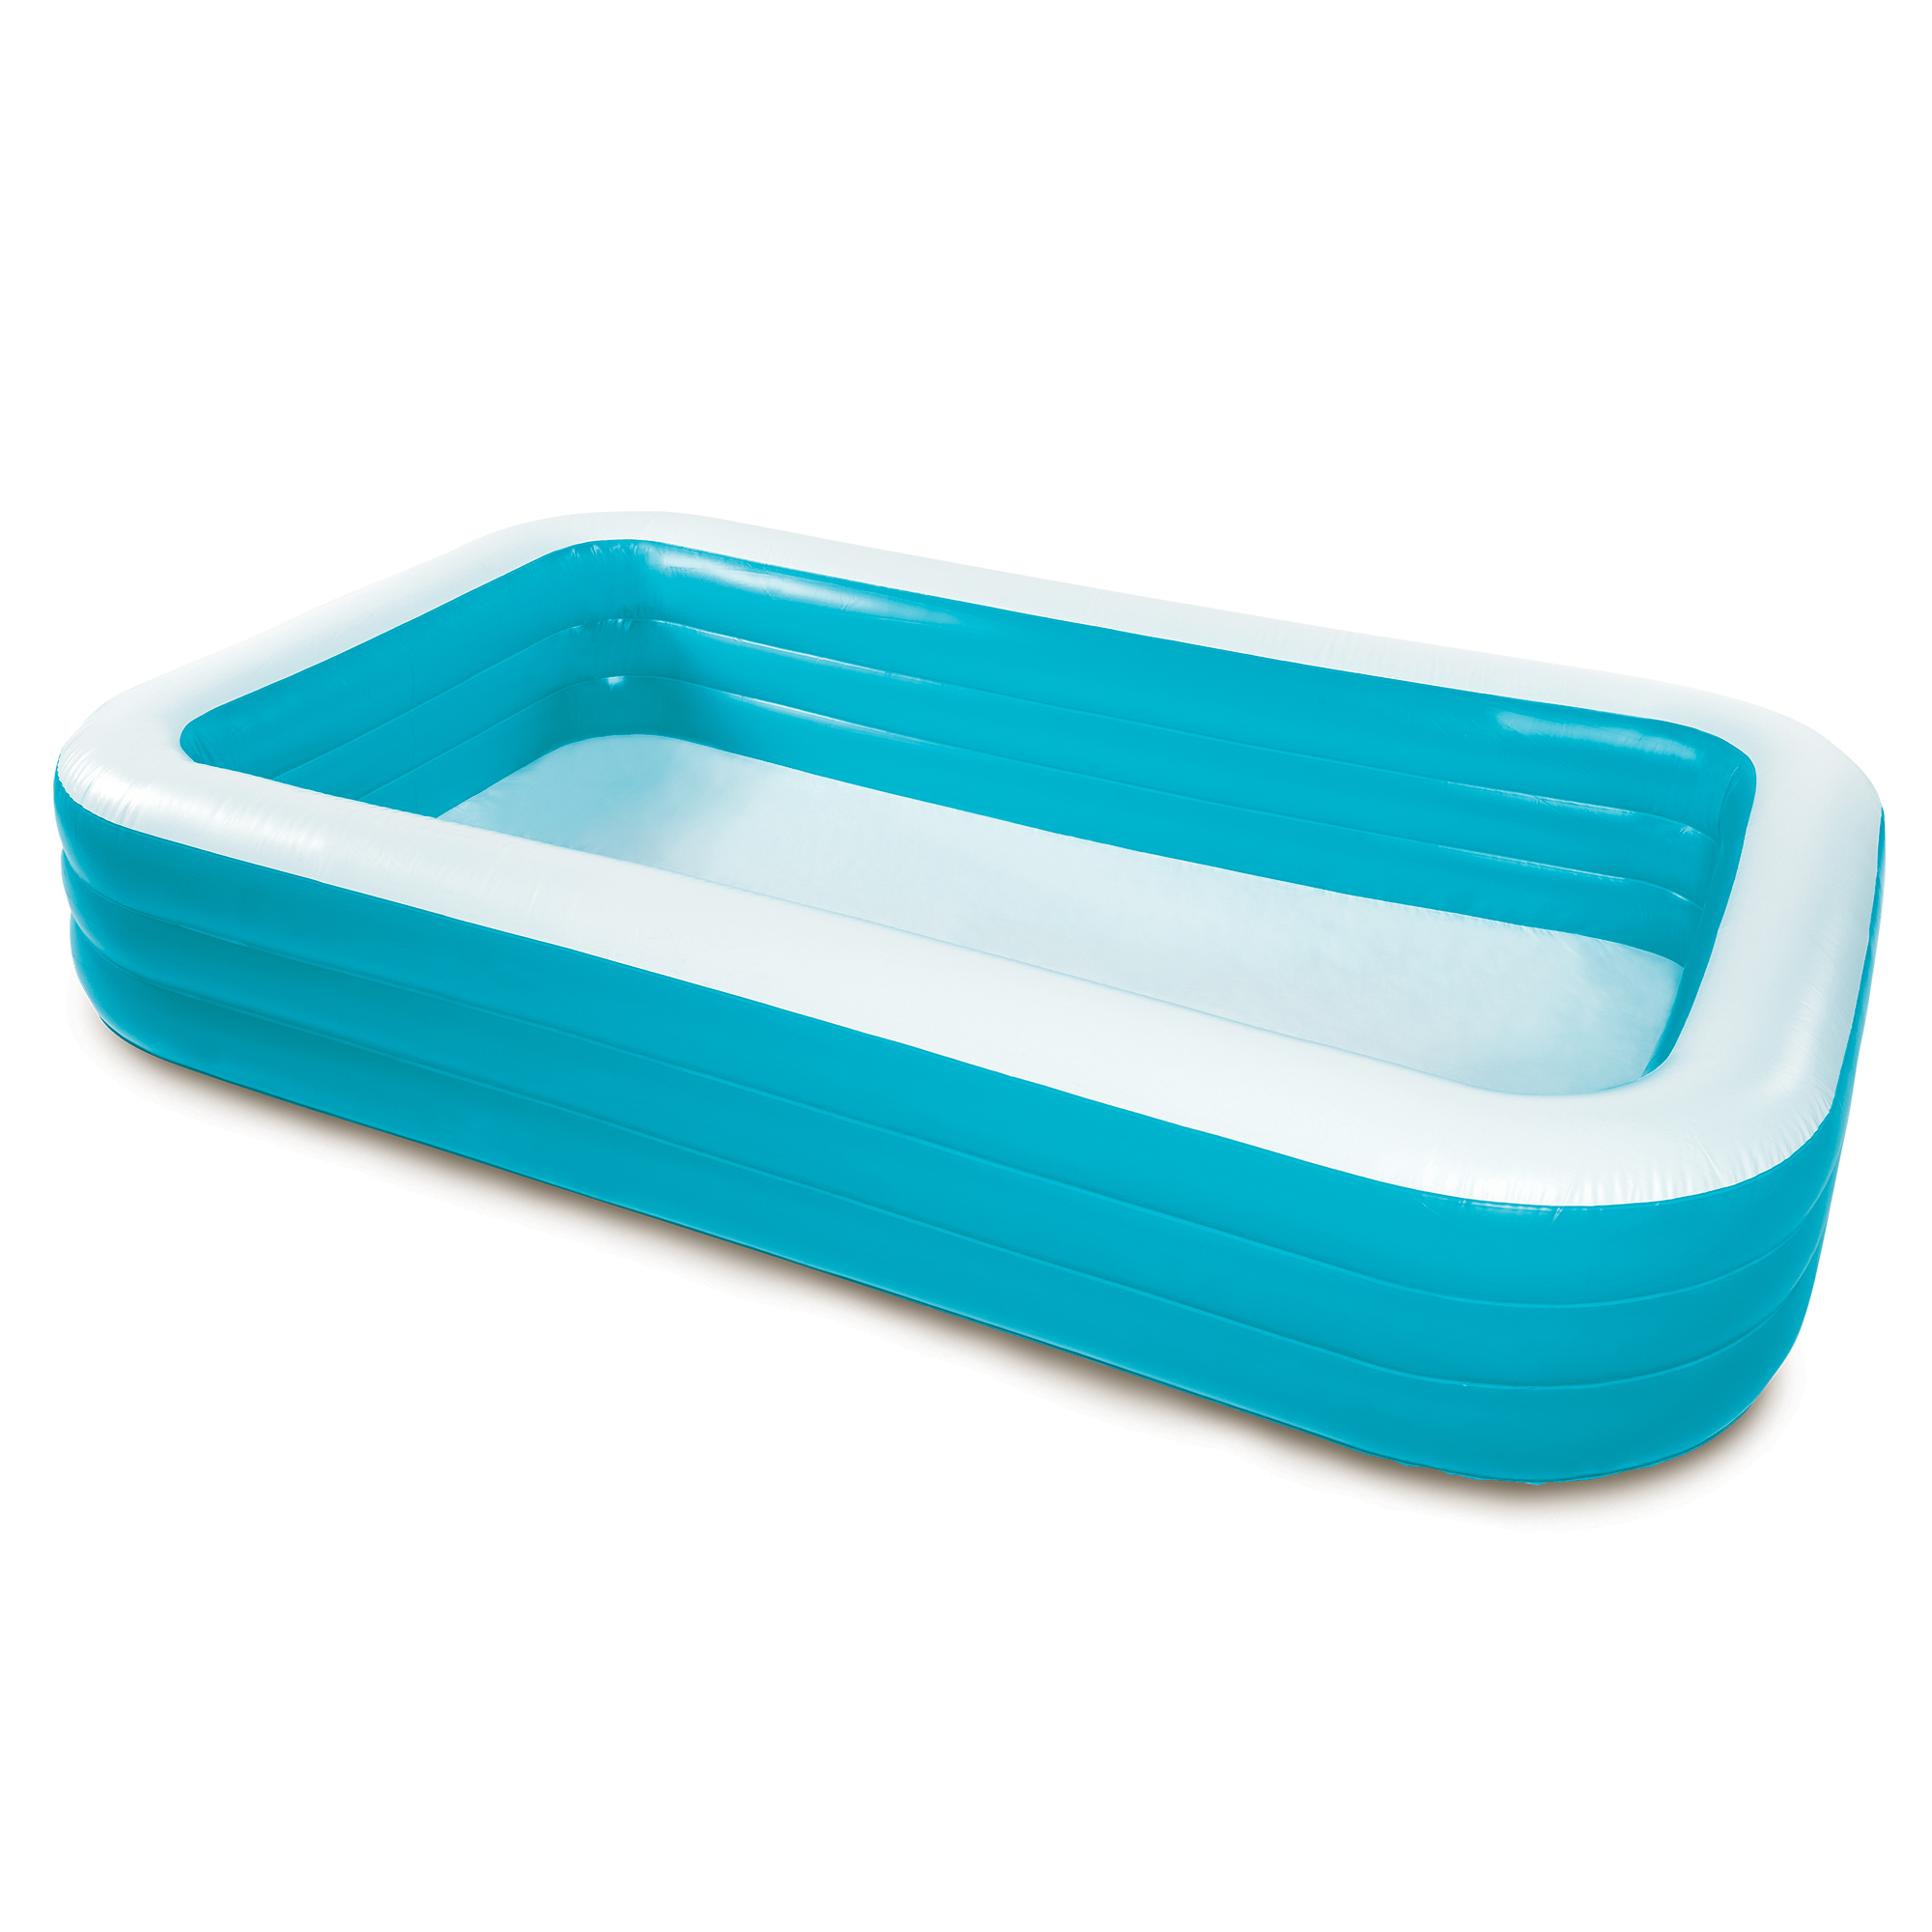 Play Day Rectangular Inflatable Family Pool, 120" x 72" x 22" - image 1 of 6